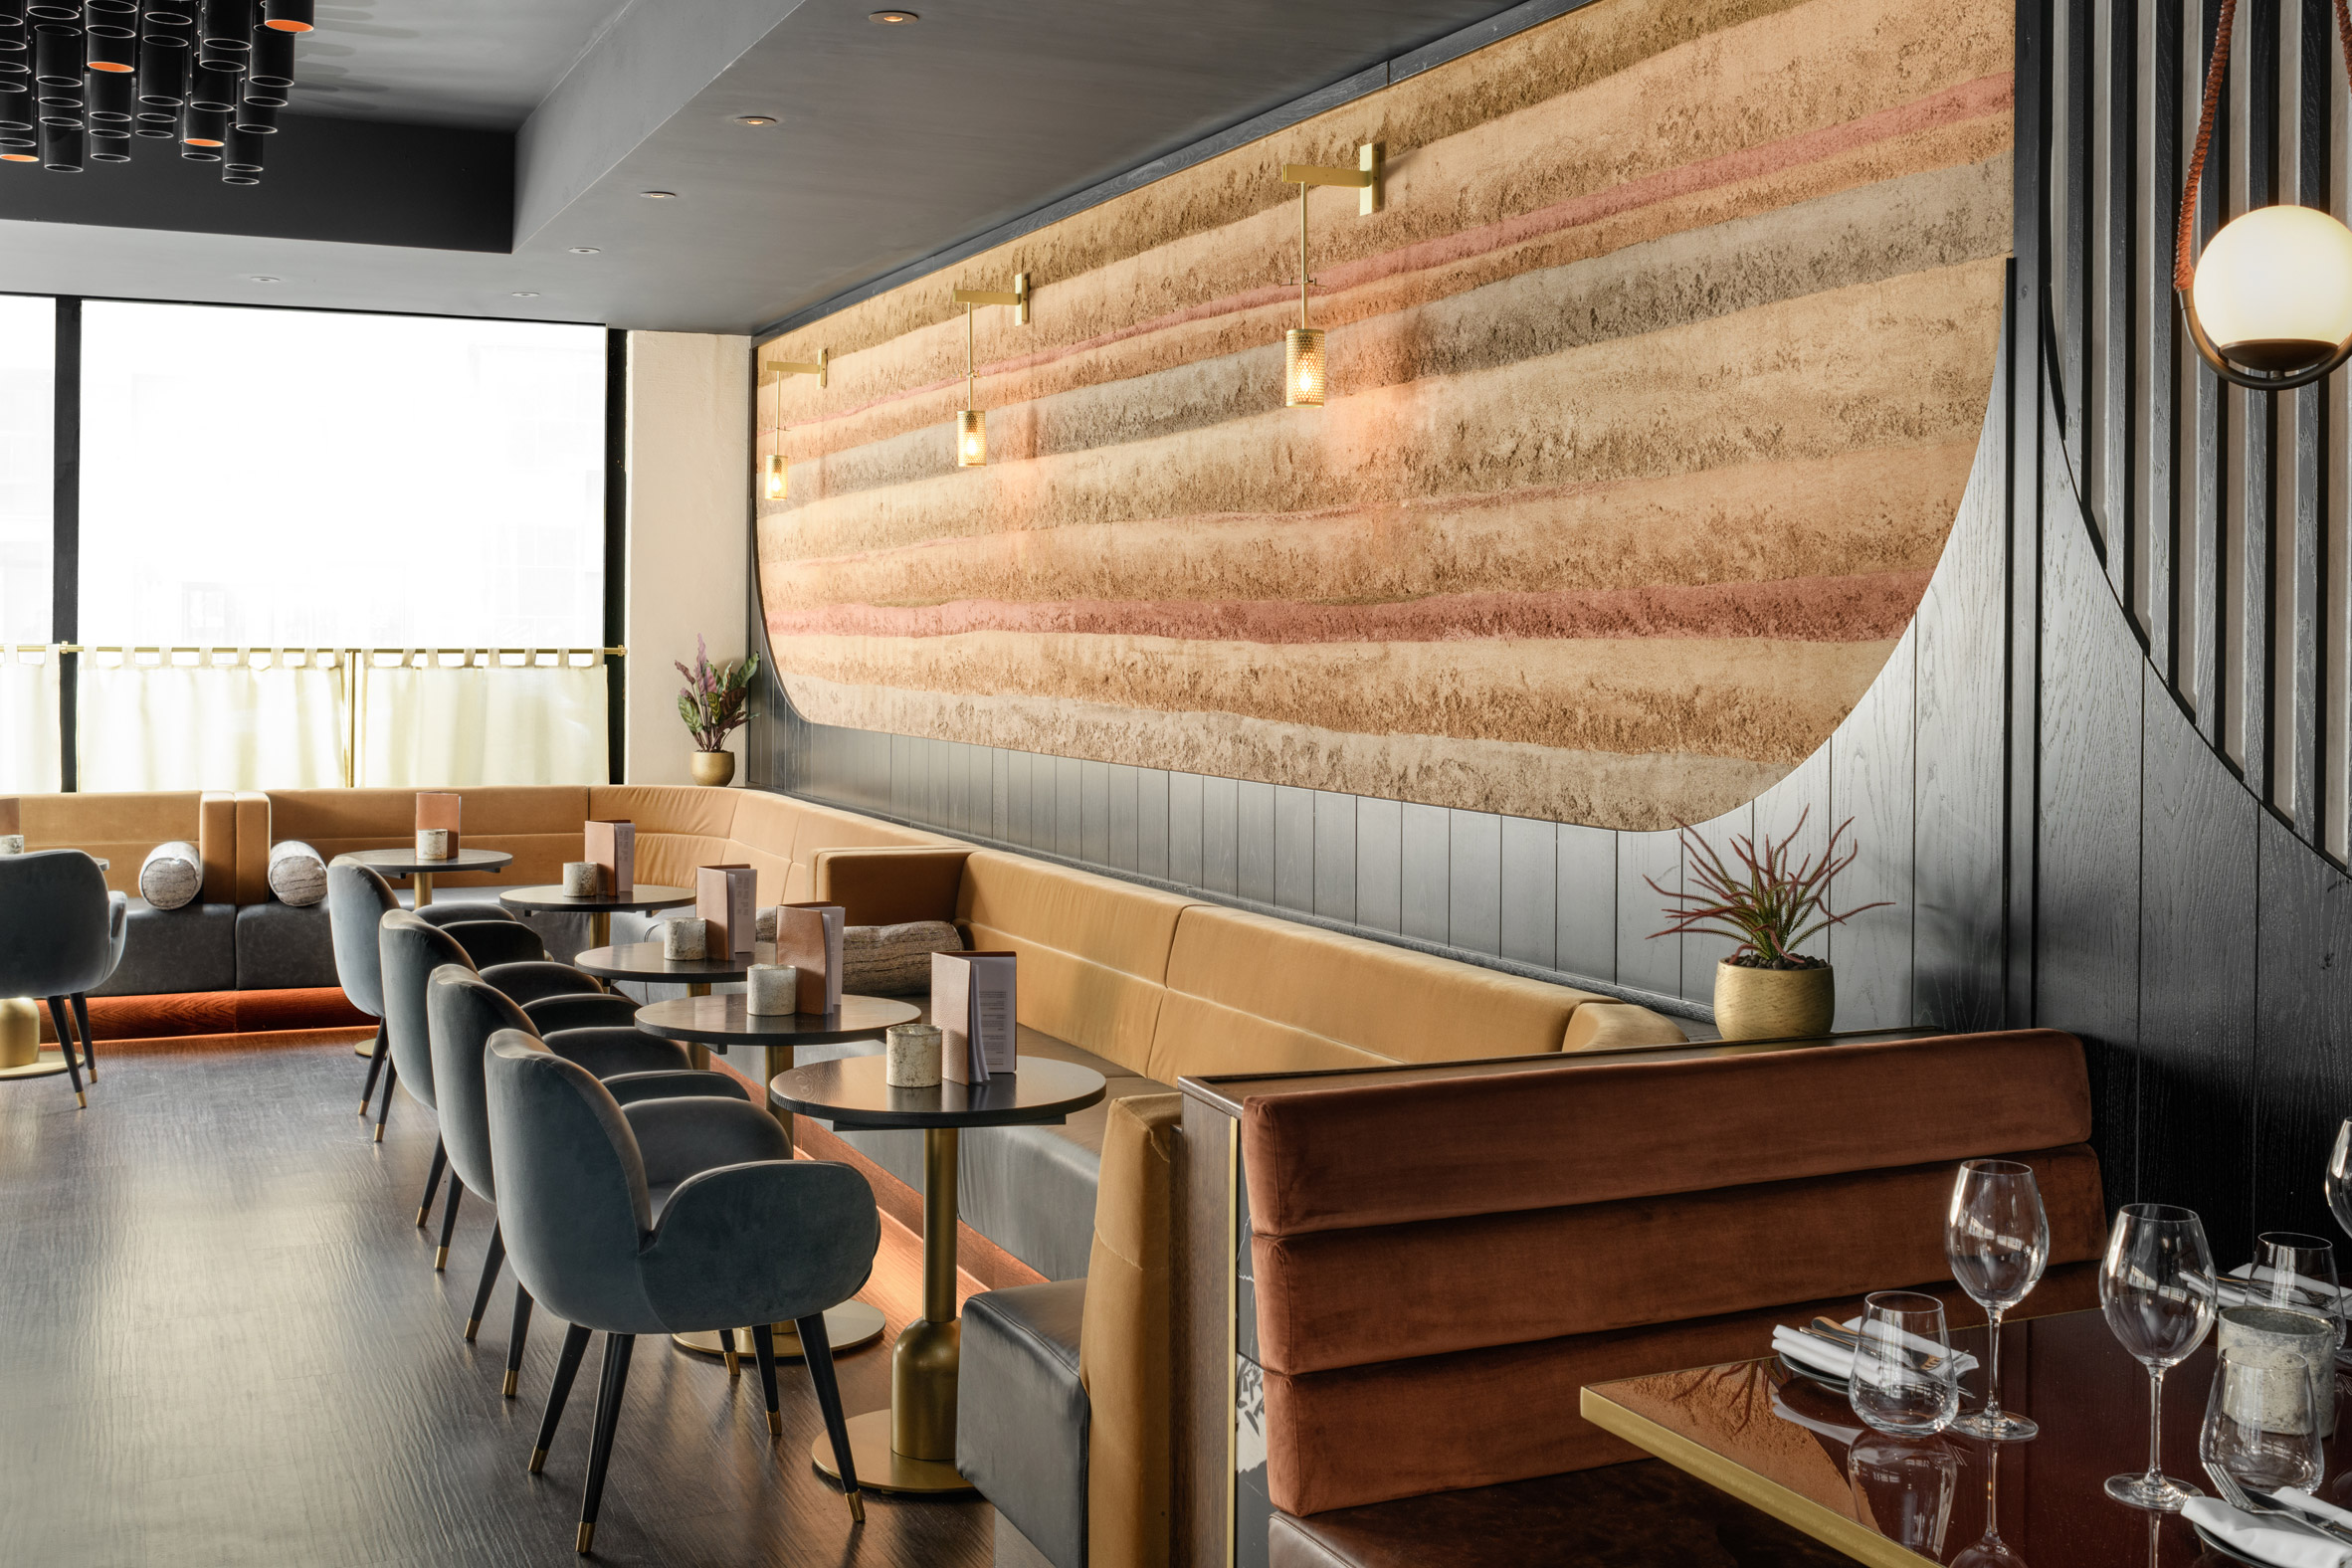 Restaurant interior with rammed earth wall and black chairs